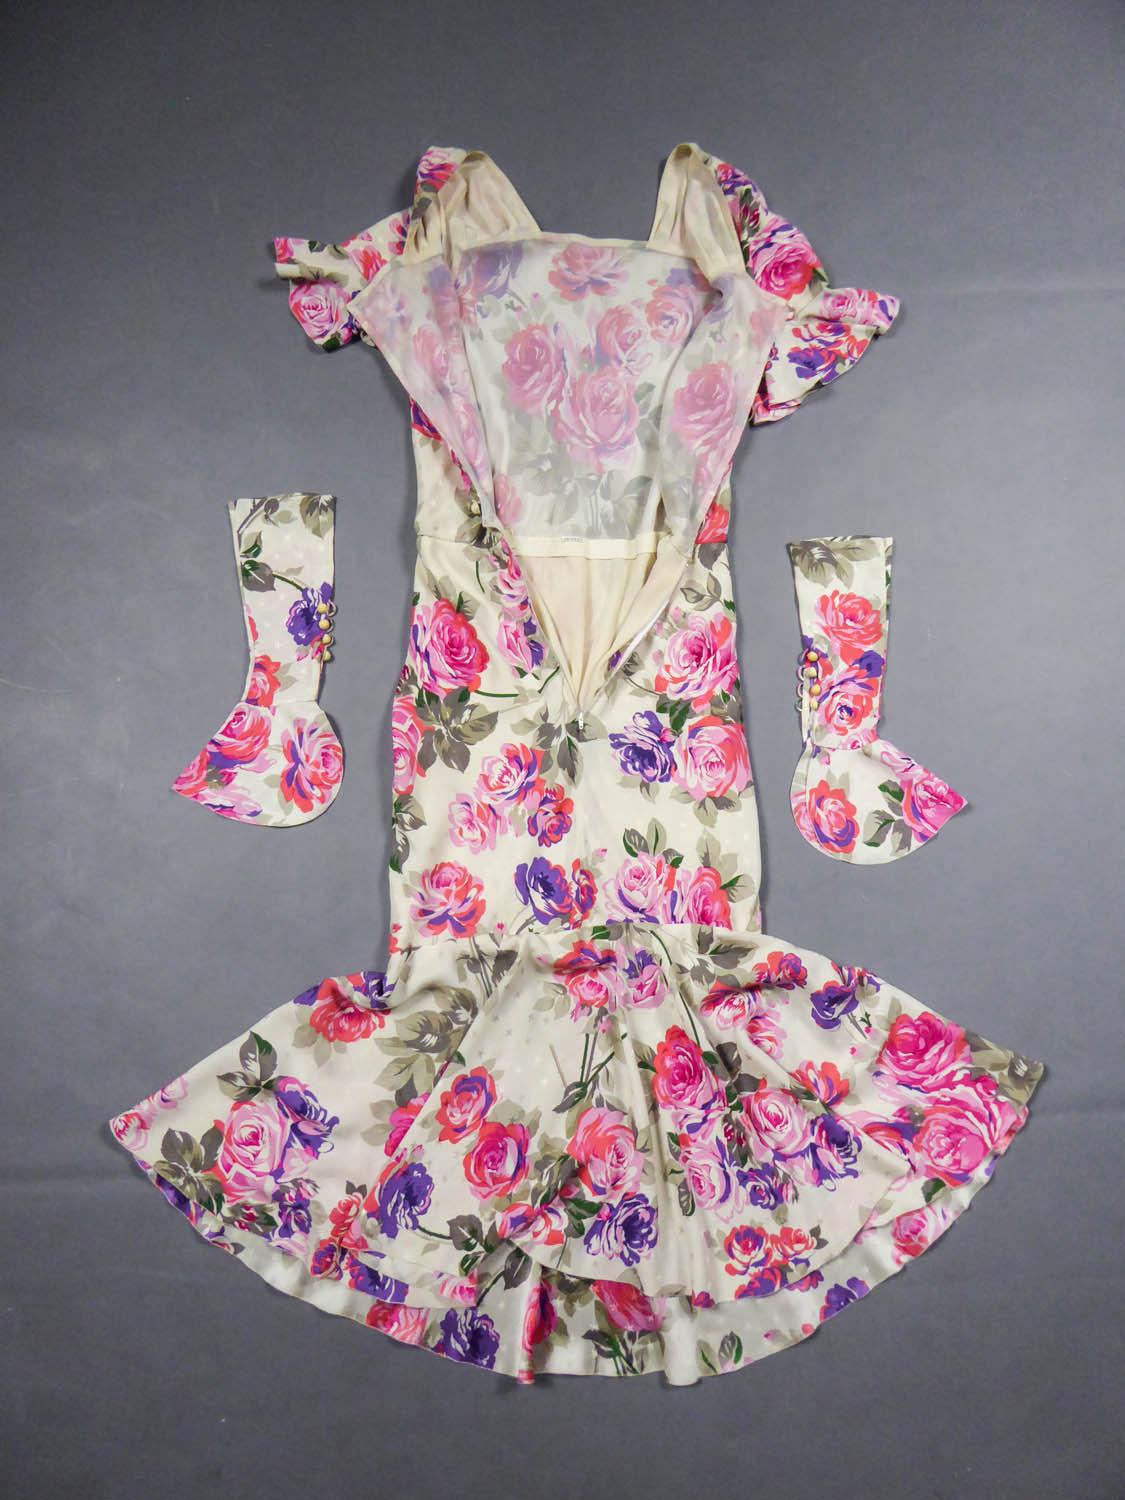 Circa 1985
France

Jeanne Lanvin summer dress in cream satin prints with patterns of roses in shades of pink, purple, coral and khaki. Straight collar, ruffle sleeve and removable cuffs covering the hand and simulating fingerless glove, closing with